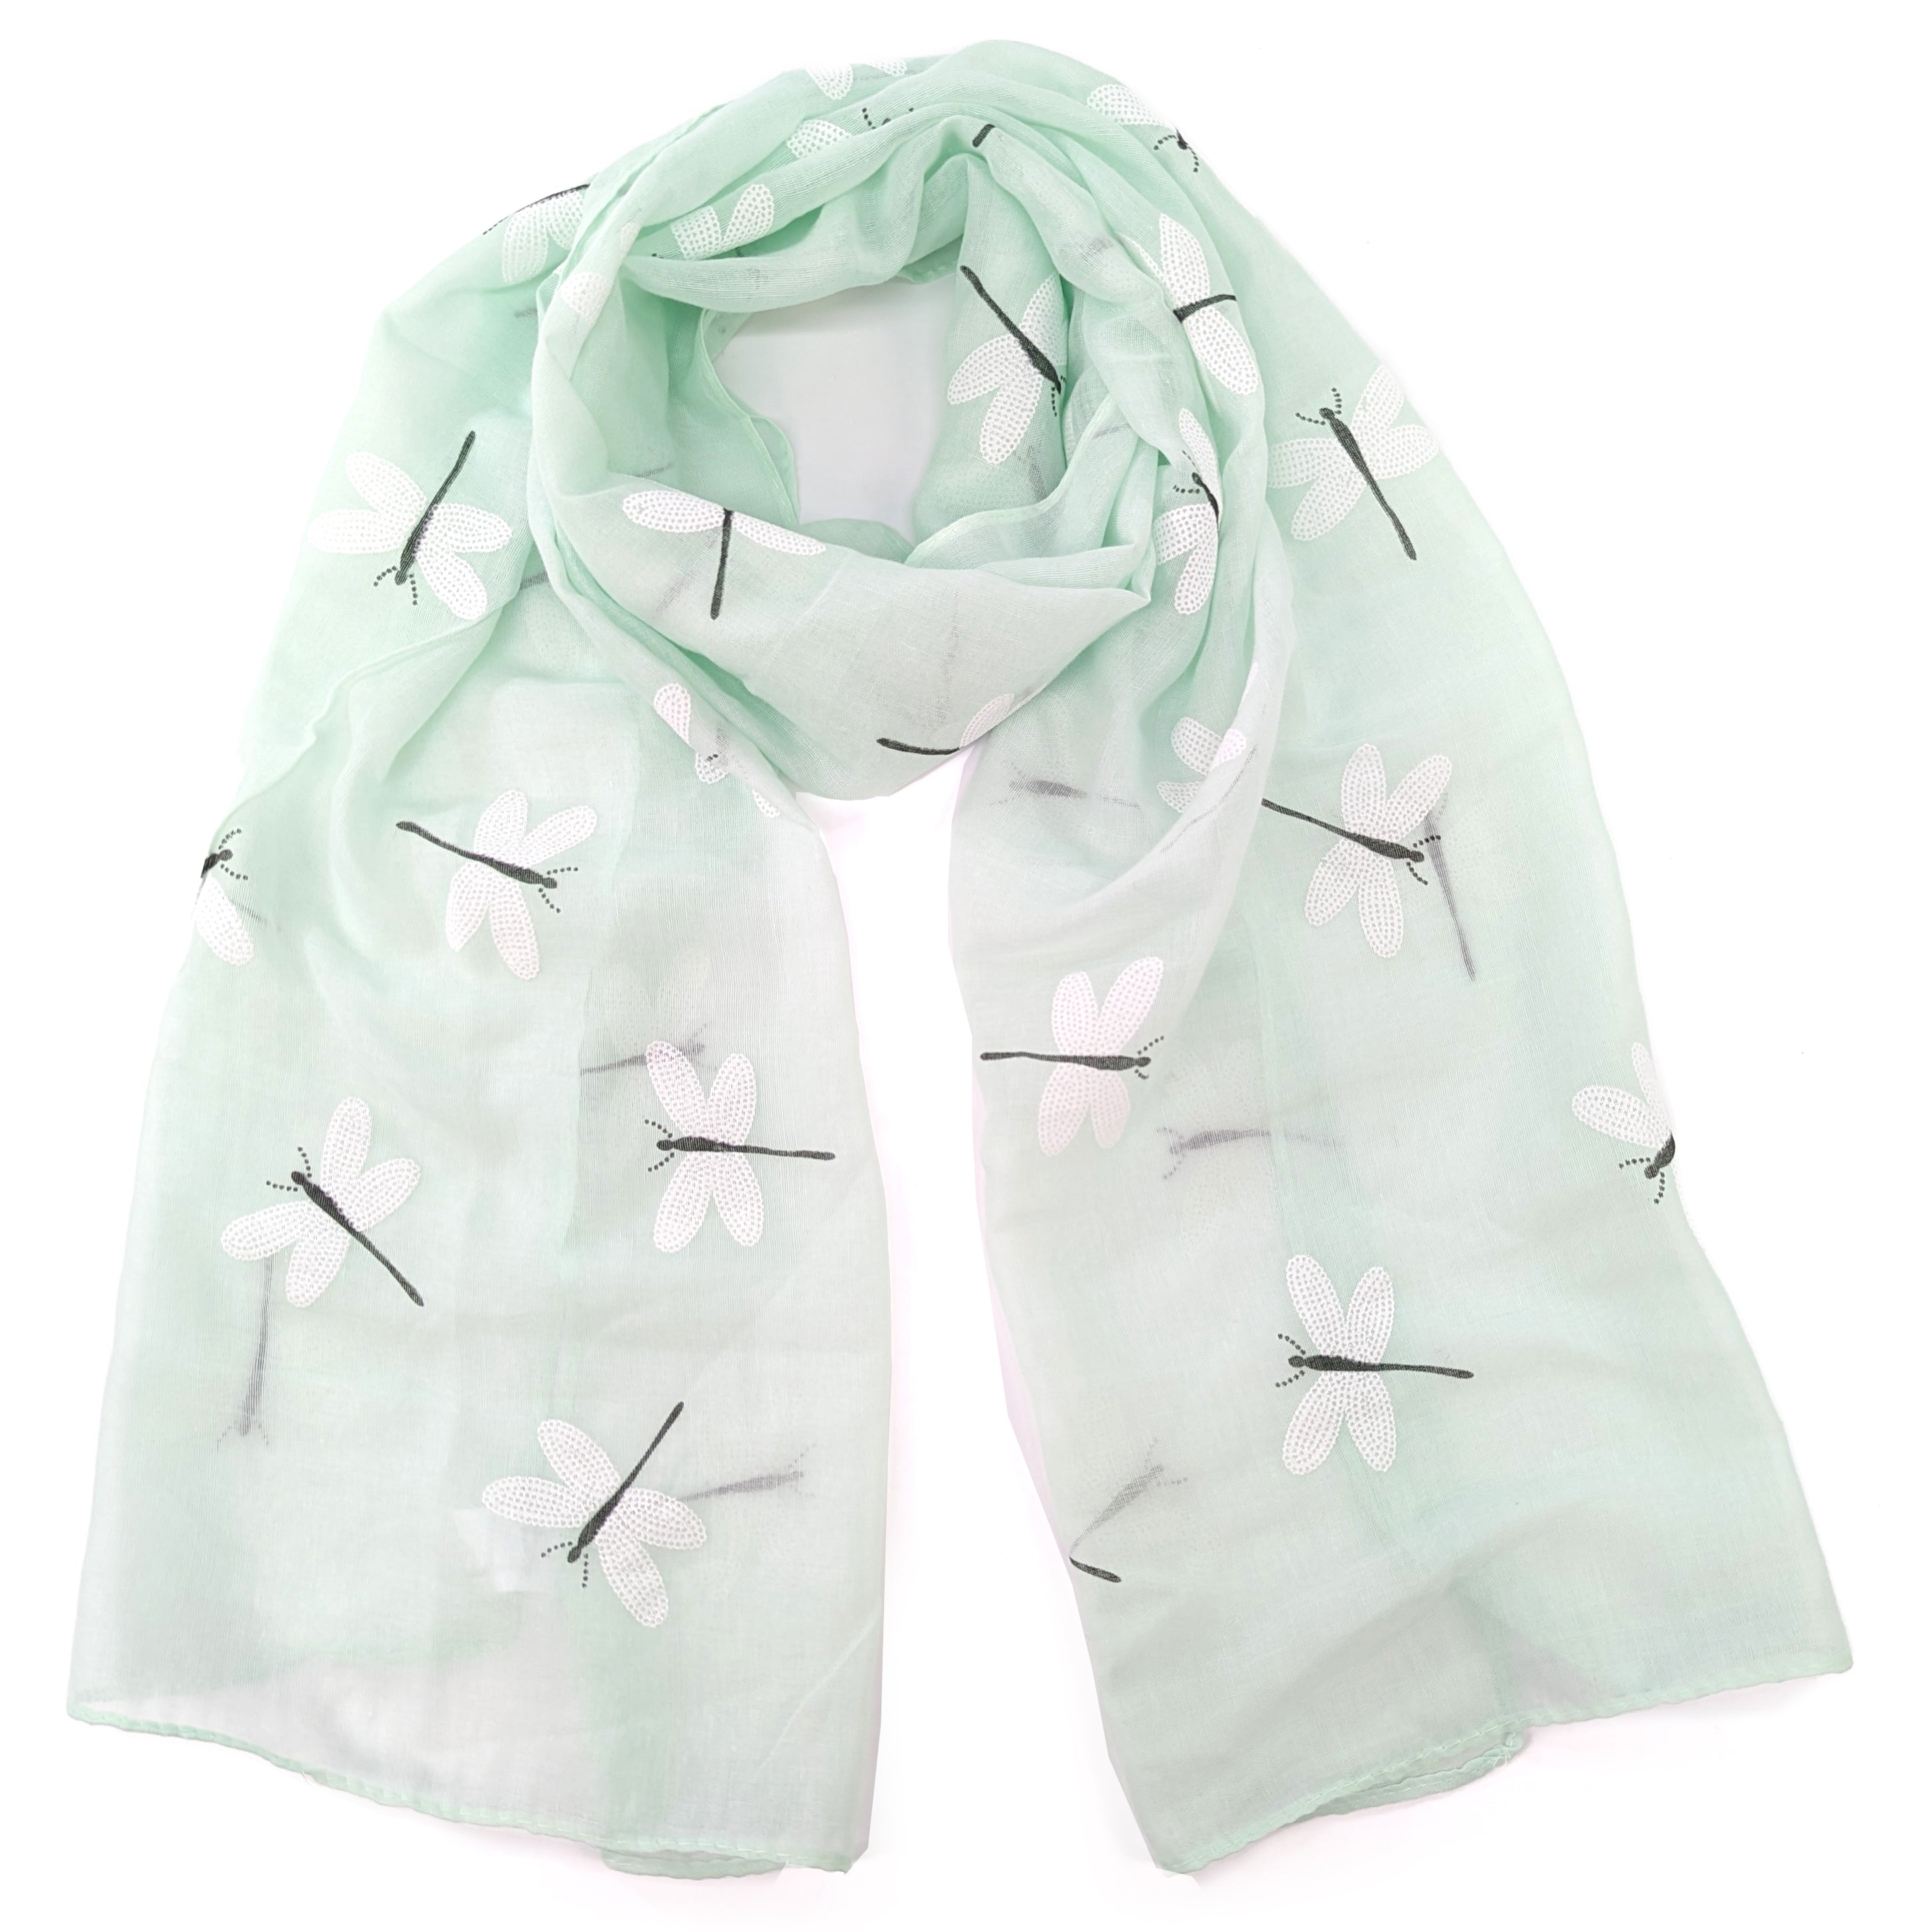 Marle - White Dragonfly Scarf (50x180cm) - Mint Green